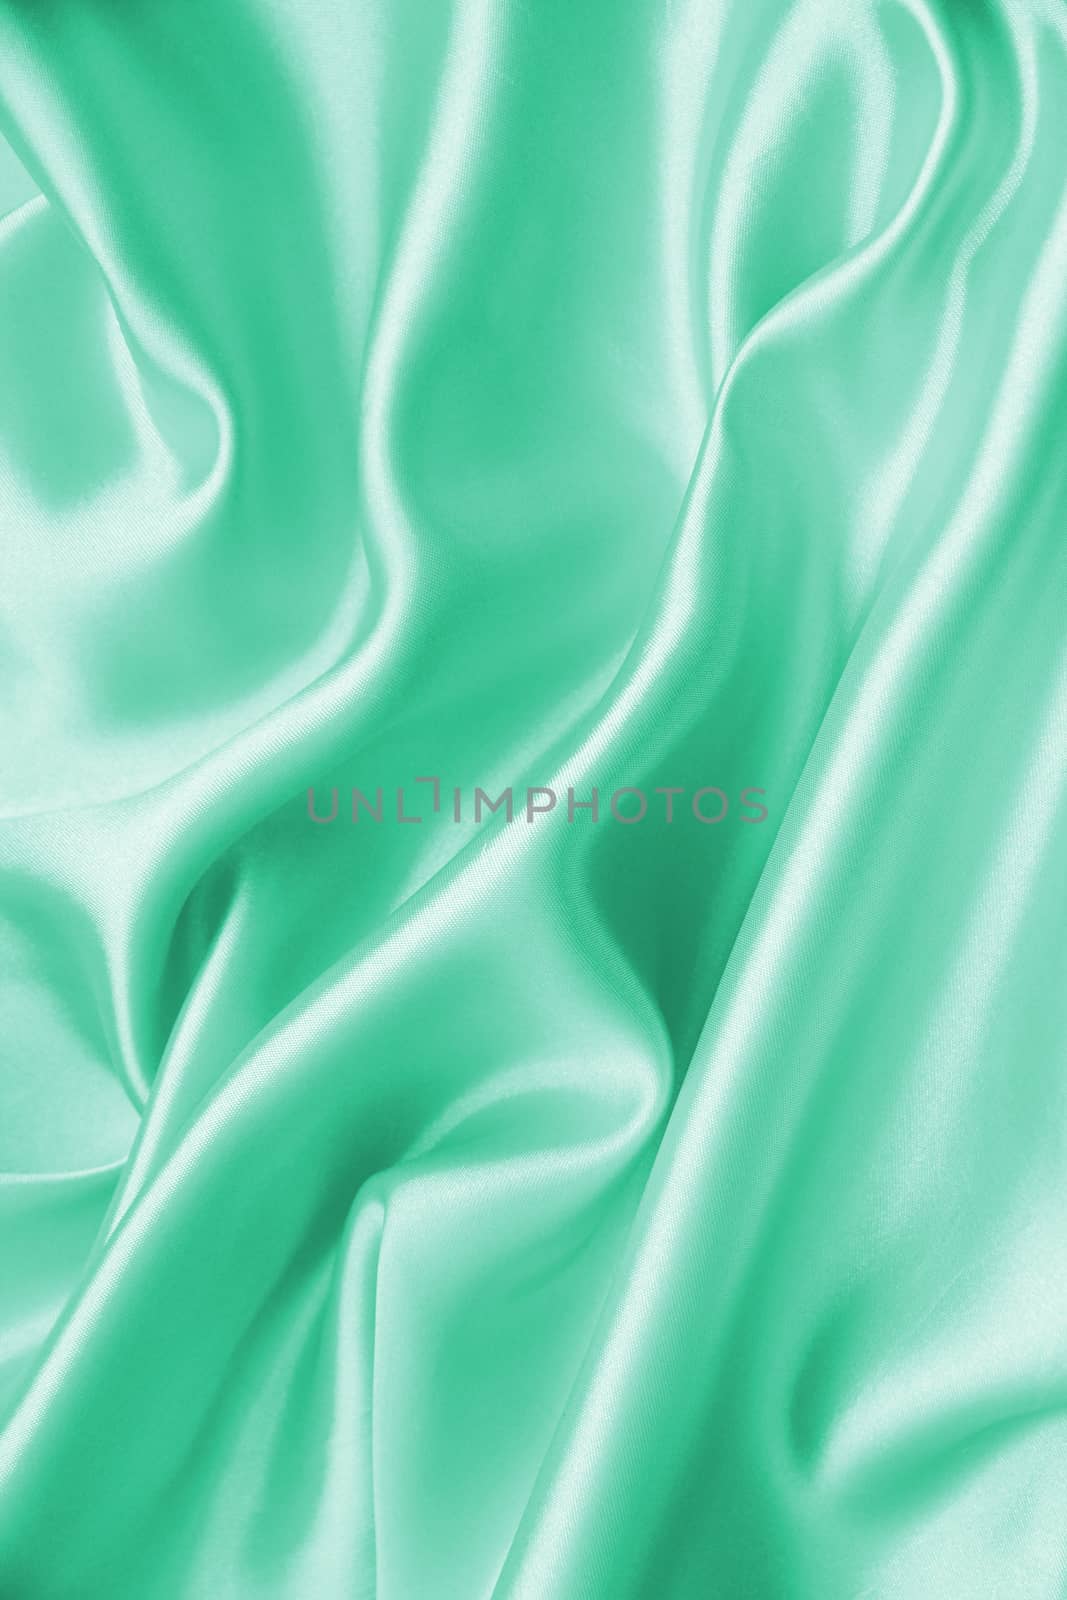 Smooth elegant green silk as background  by oxanatravel